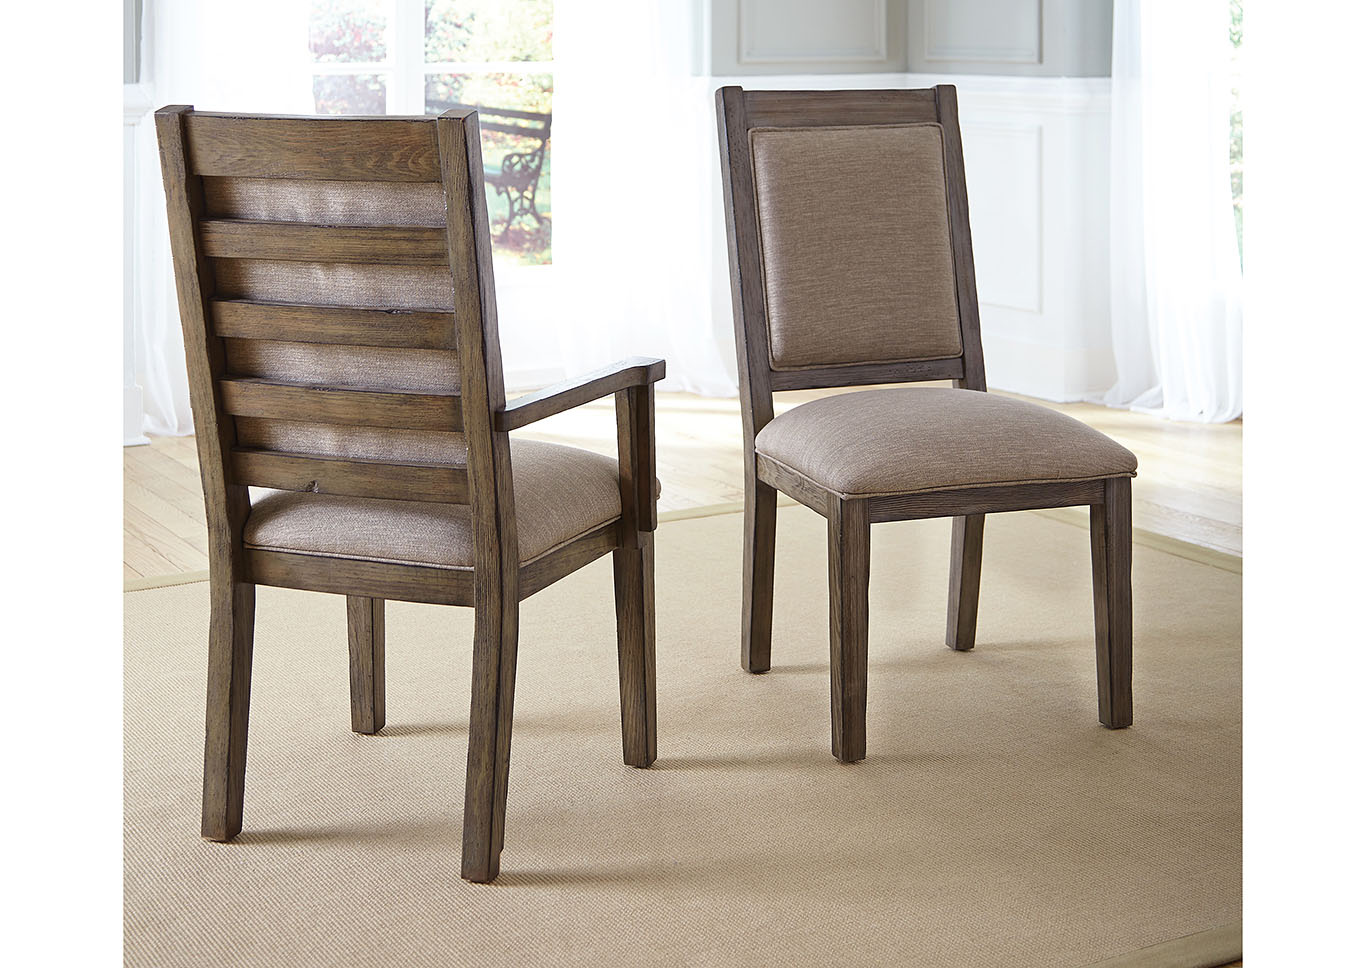 Foundry Driftwood Upholstered Arm Chair (Set of 2),Kincaid